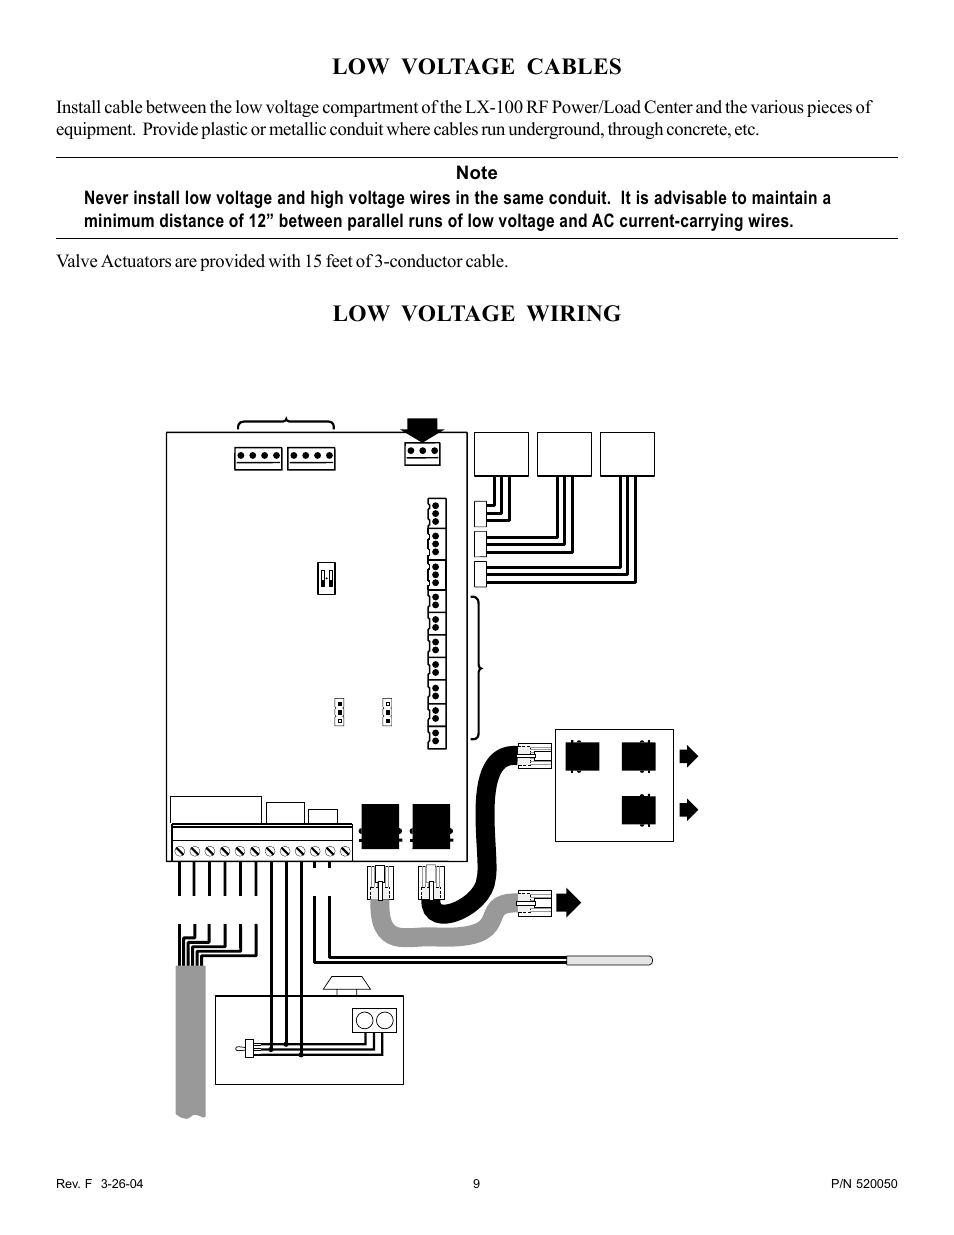 Wiring, Low voltage cables, Low voltage wiring | Pentair EasyTouch Pool/Spa Control System LX-100EZ User Manual | Page 9 / 32